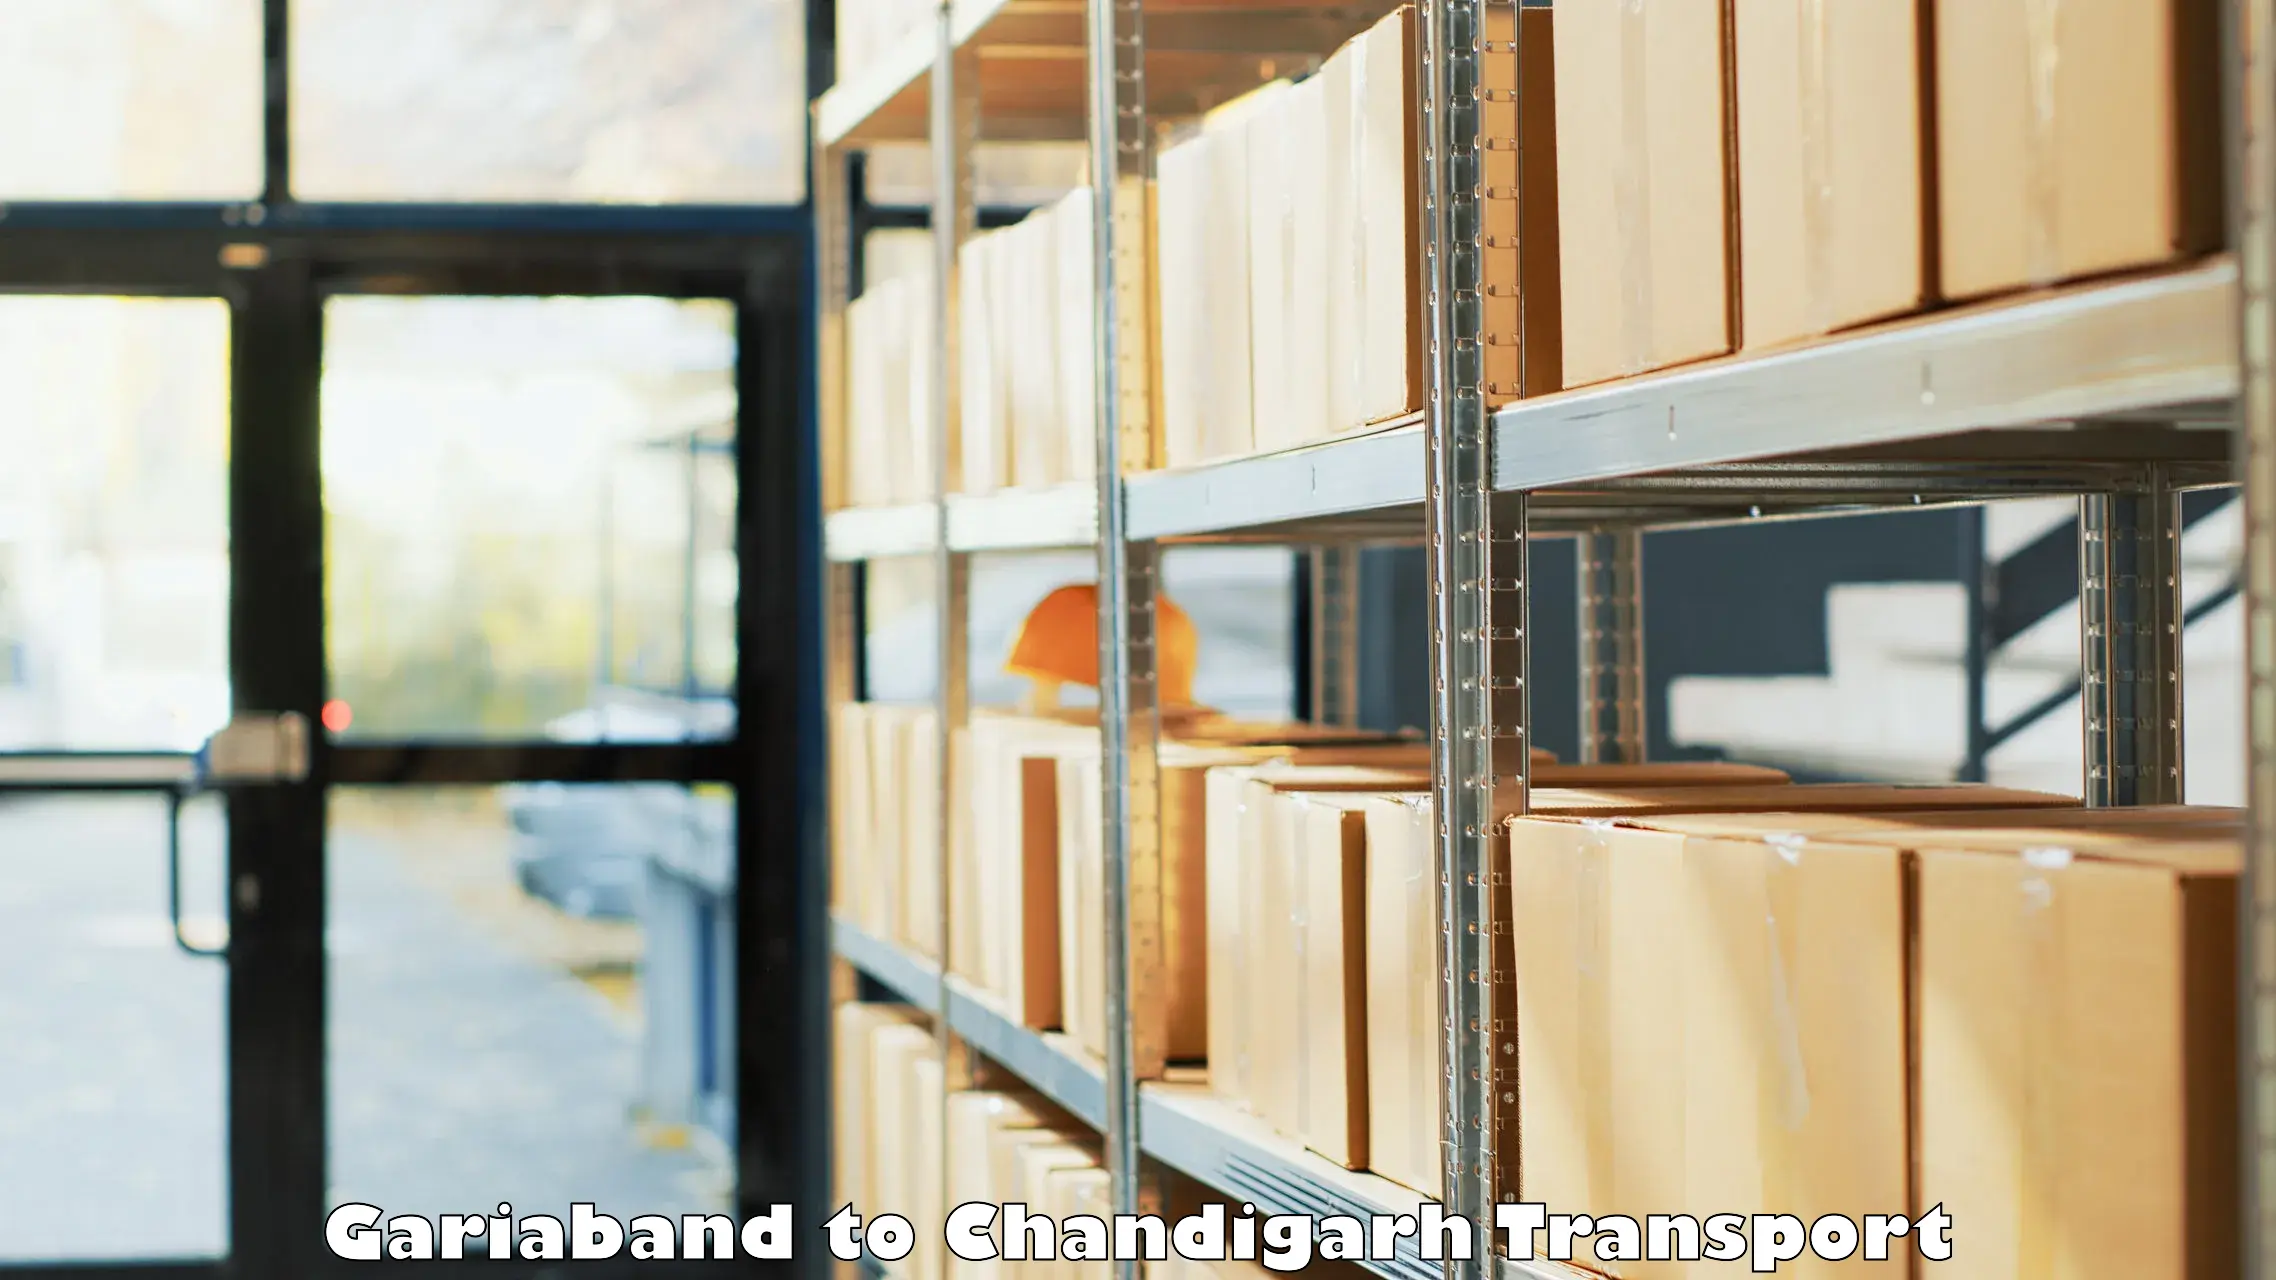 Express transport services Gariaband to Chandigarh